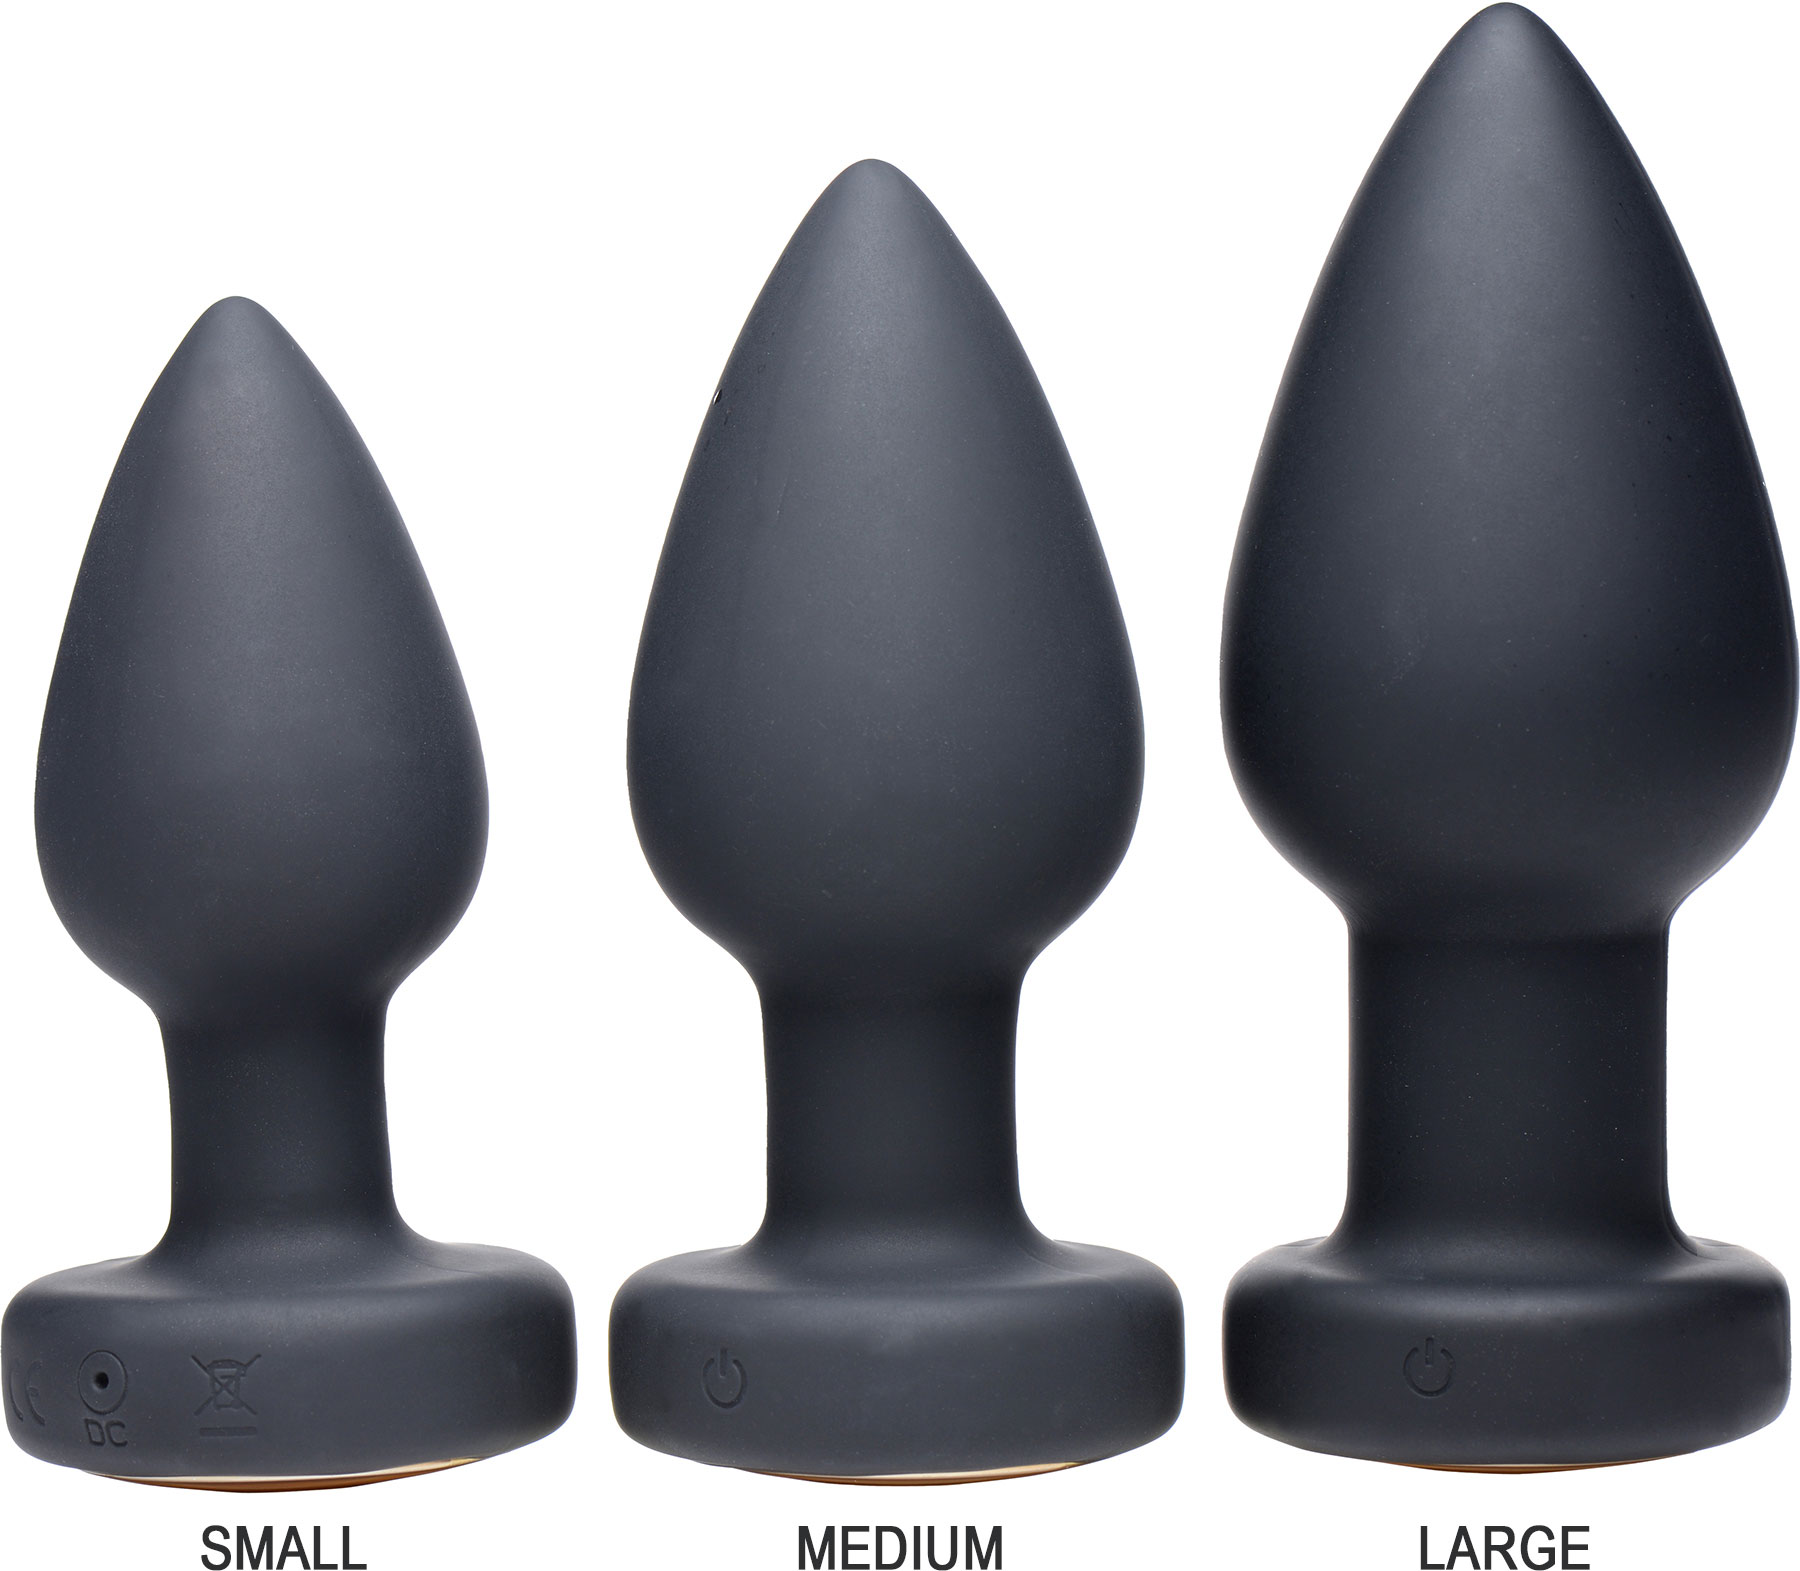 Booty Sparks Silicone 7 Mode Vibrating Butt Plug With LED Light Up Base - Size Comparison